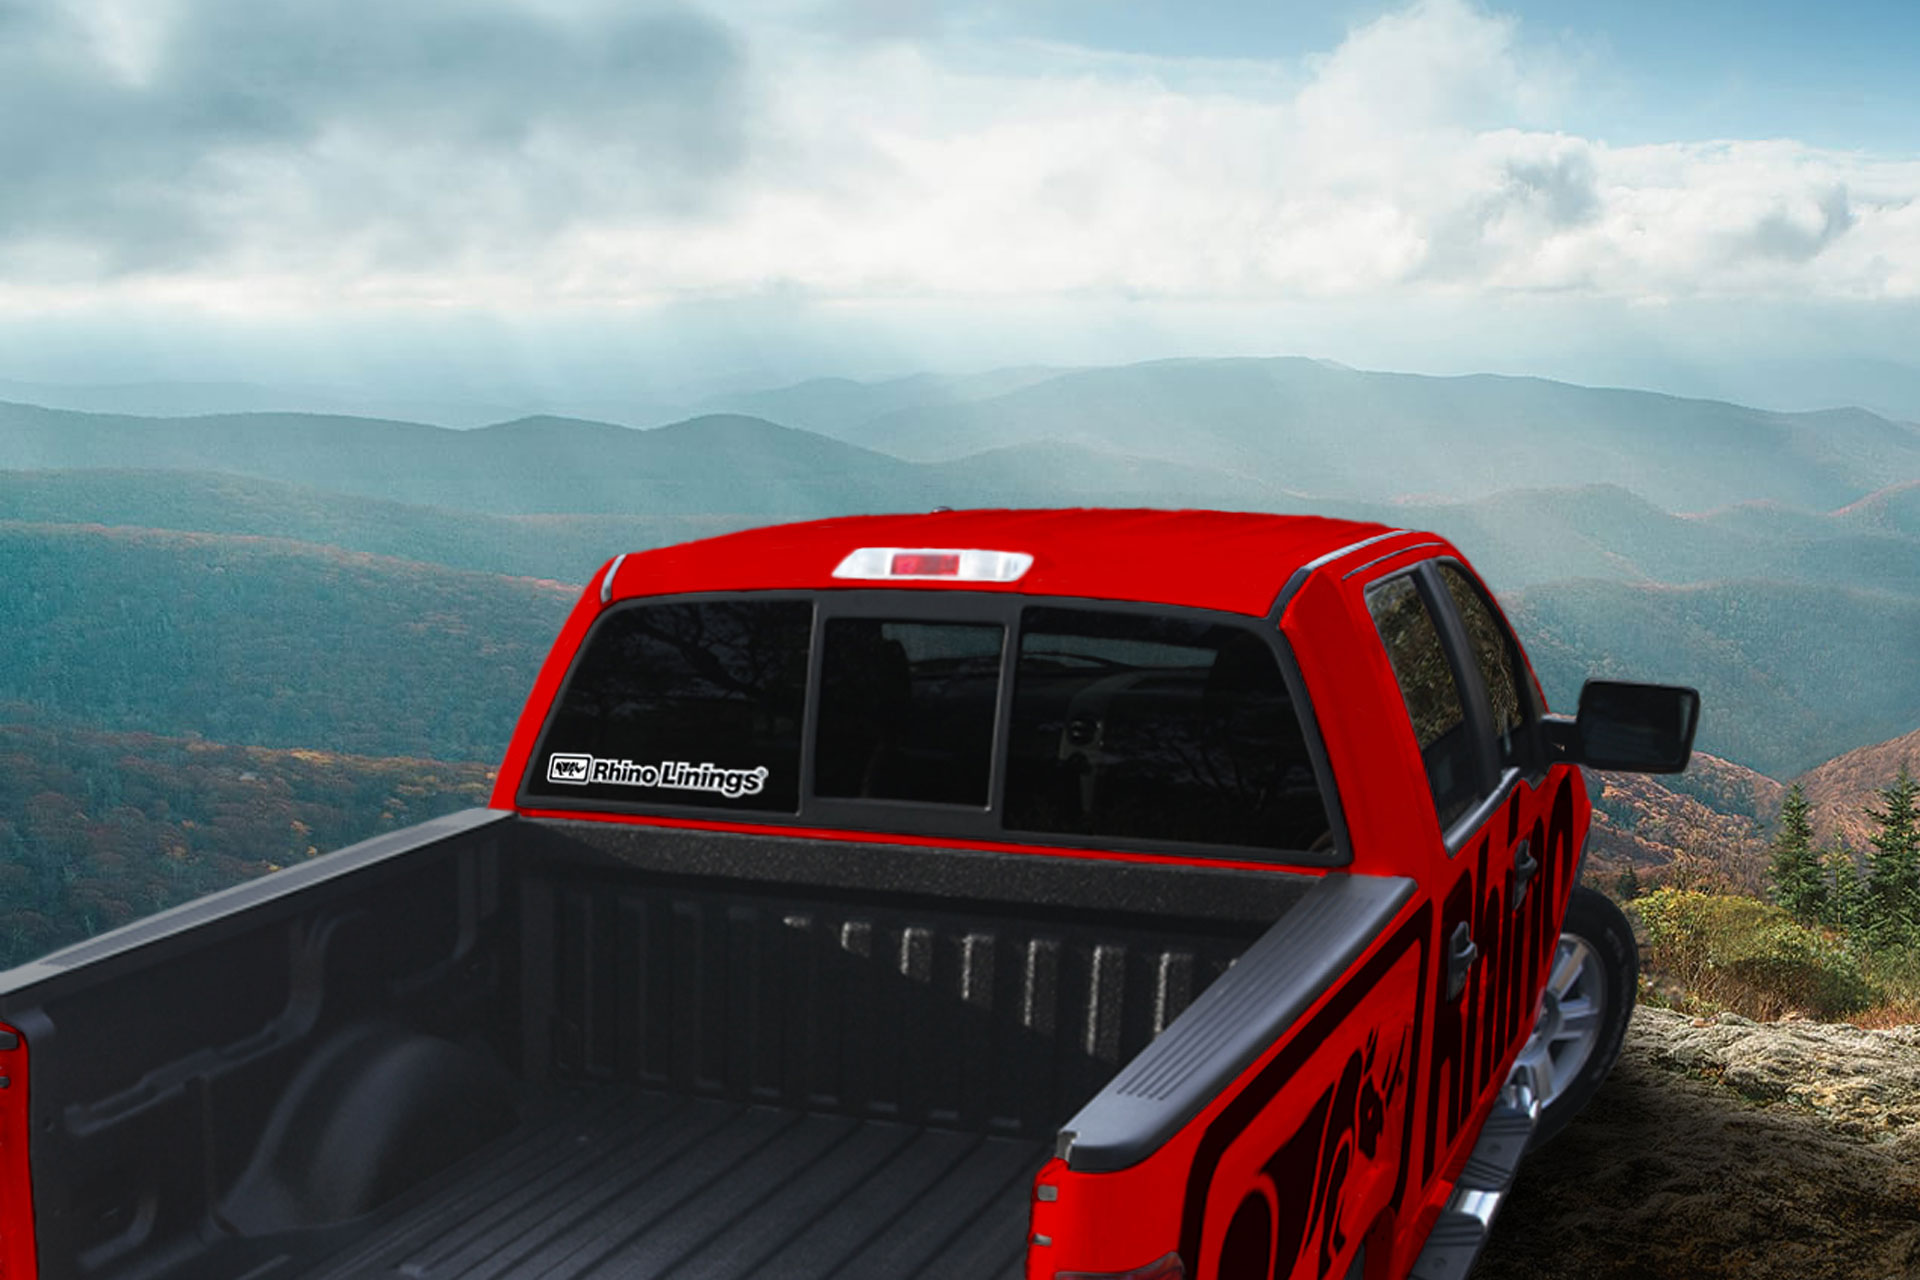 Red pickup truck with Rhino Linings branding parked atop of mountain with scenic view below